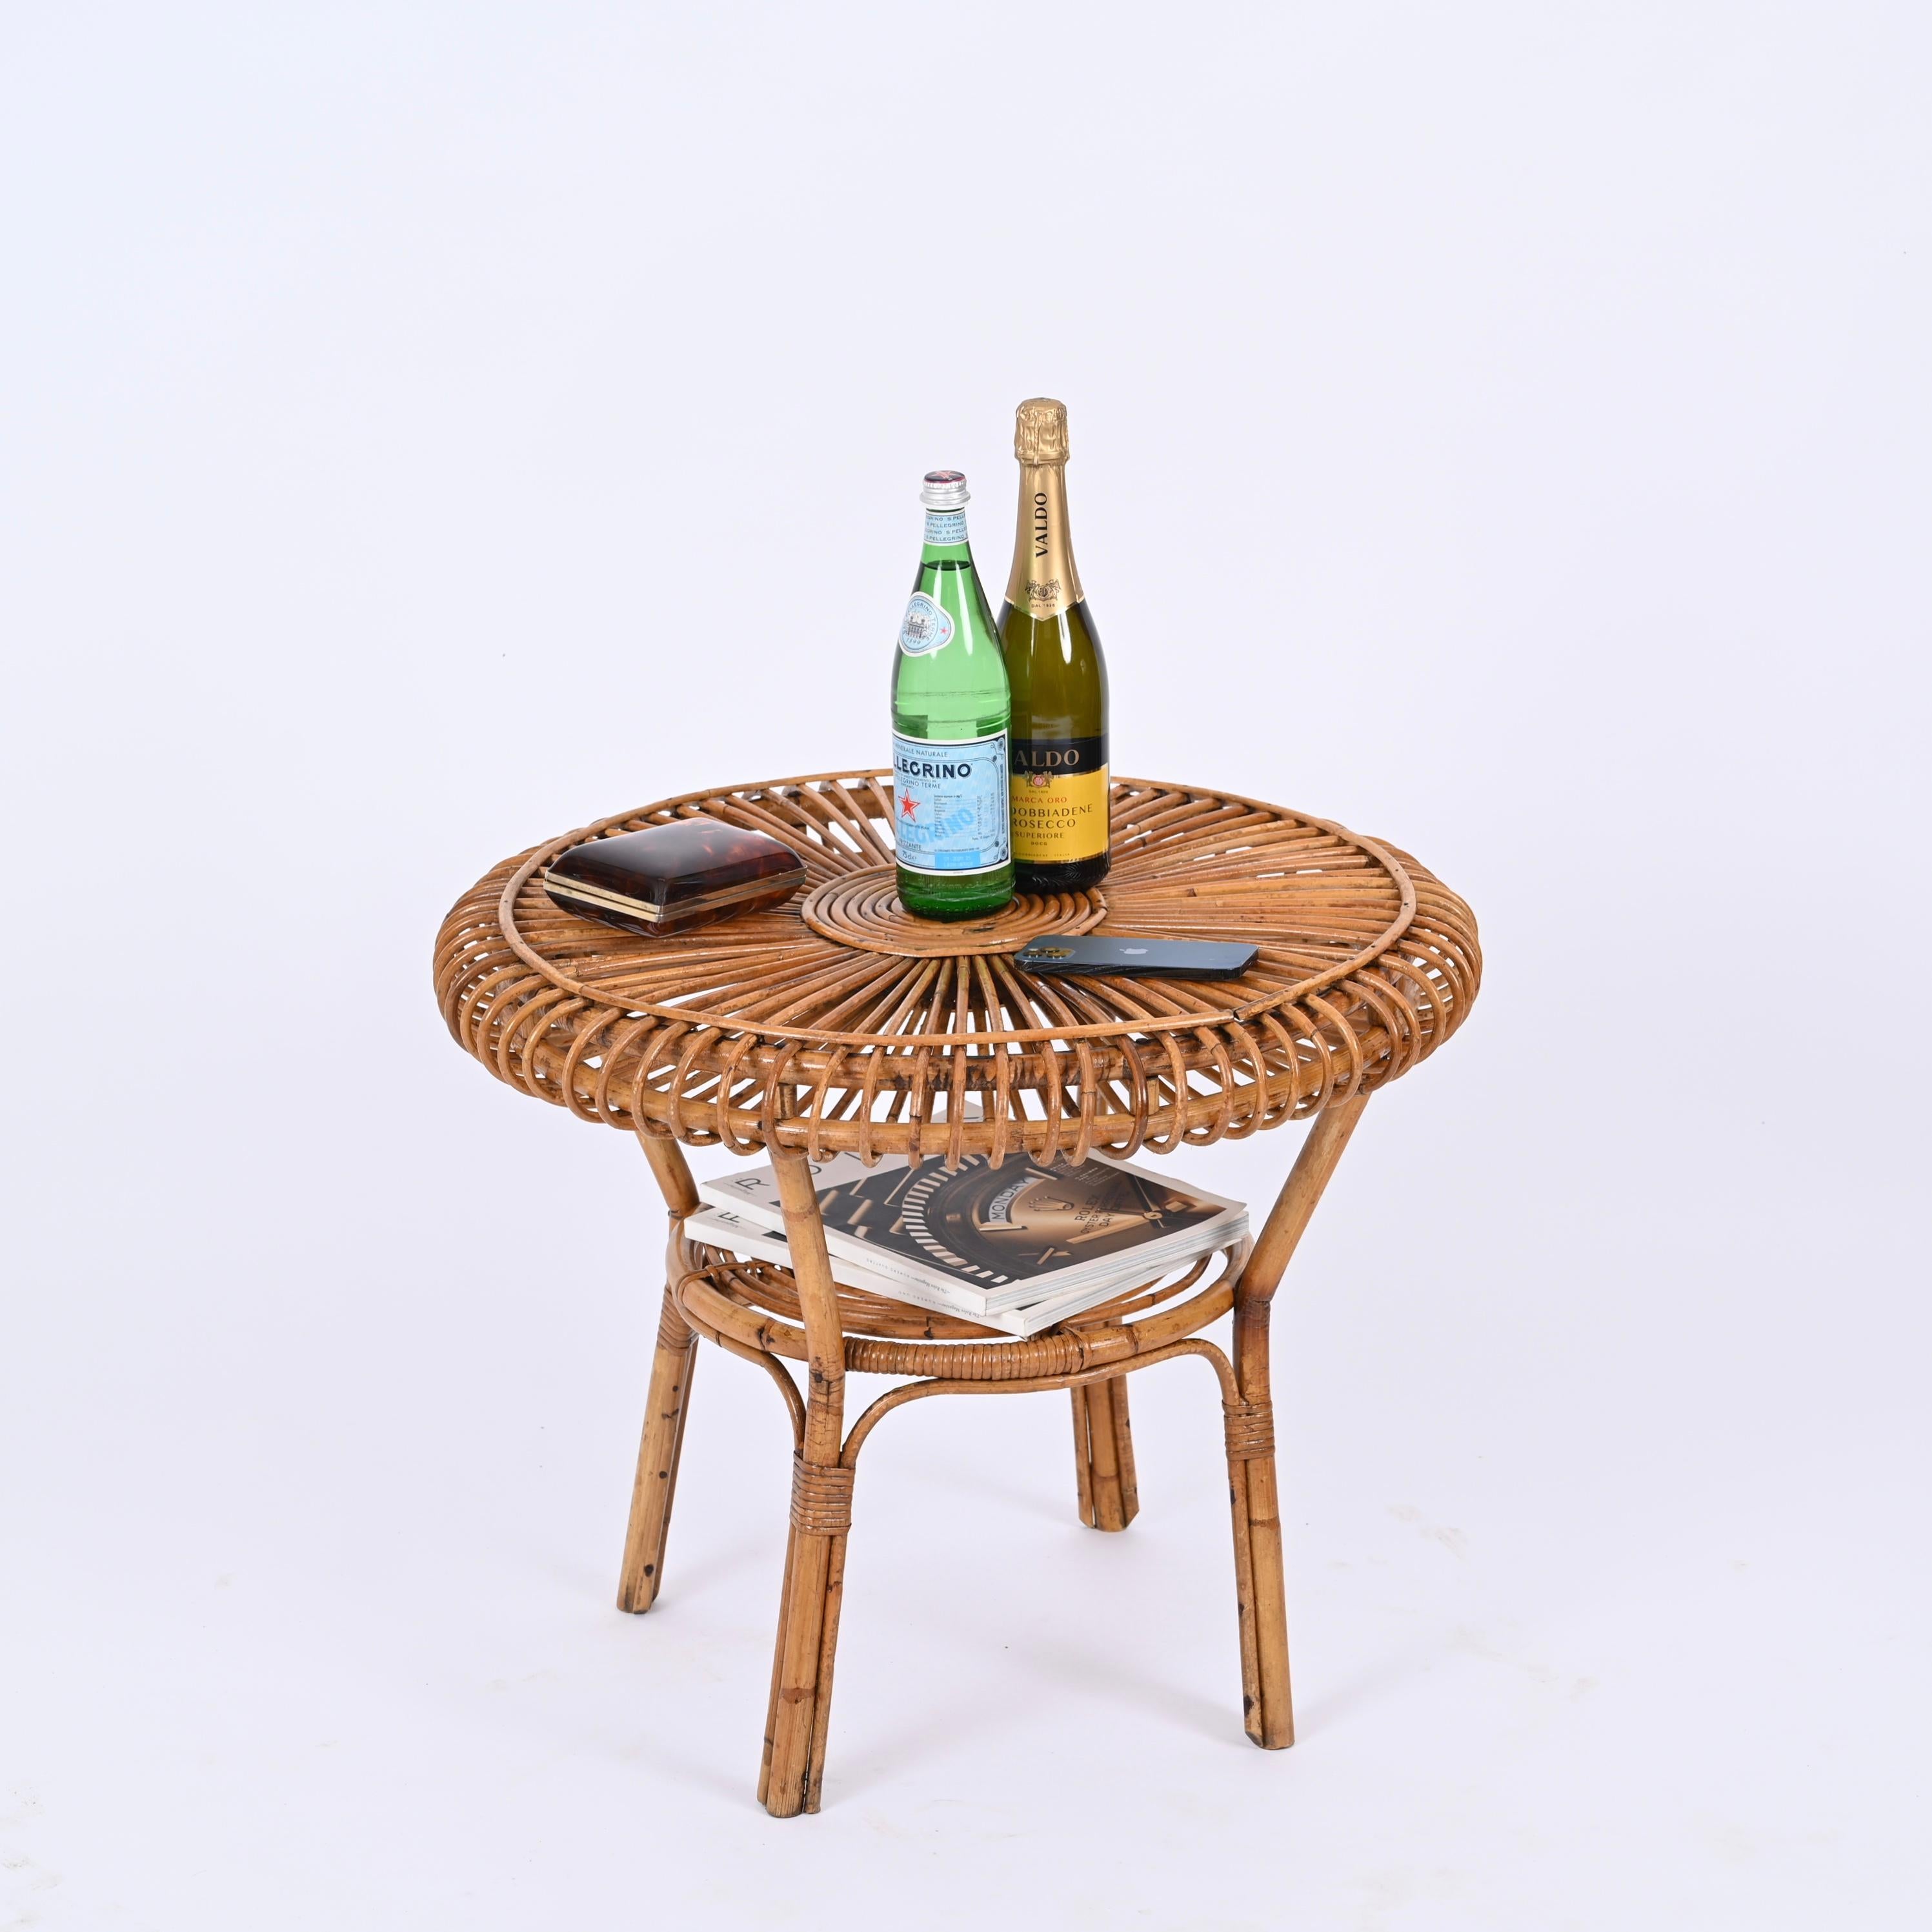 Outstanding midcentury round coffee table in curved bamboo and rattan. This lovely piece was designed in italy in the 1970s.

This beautiful two tier round coffee table has a sturdy structure fully made in bamboo canes with the top made in a